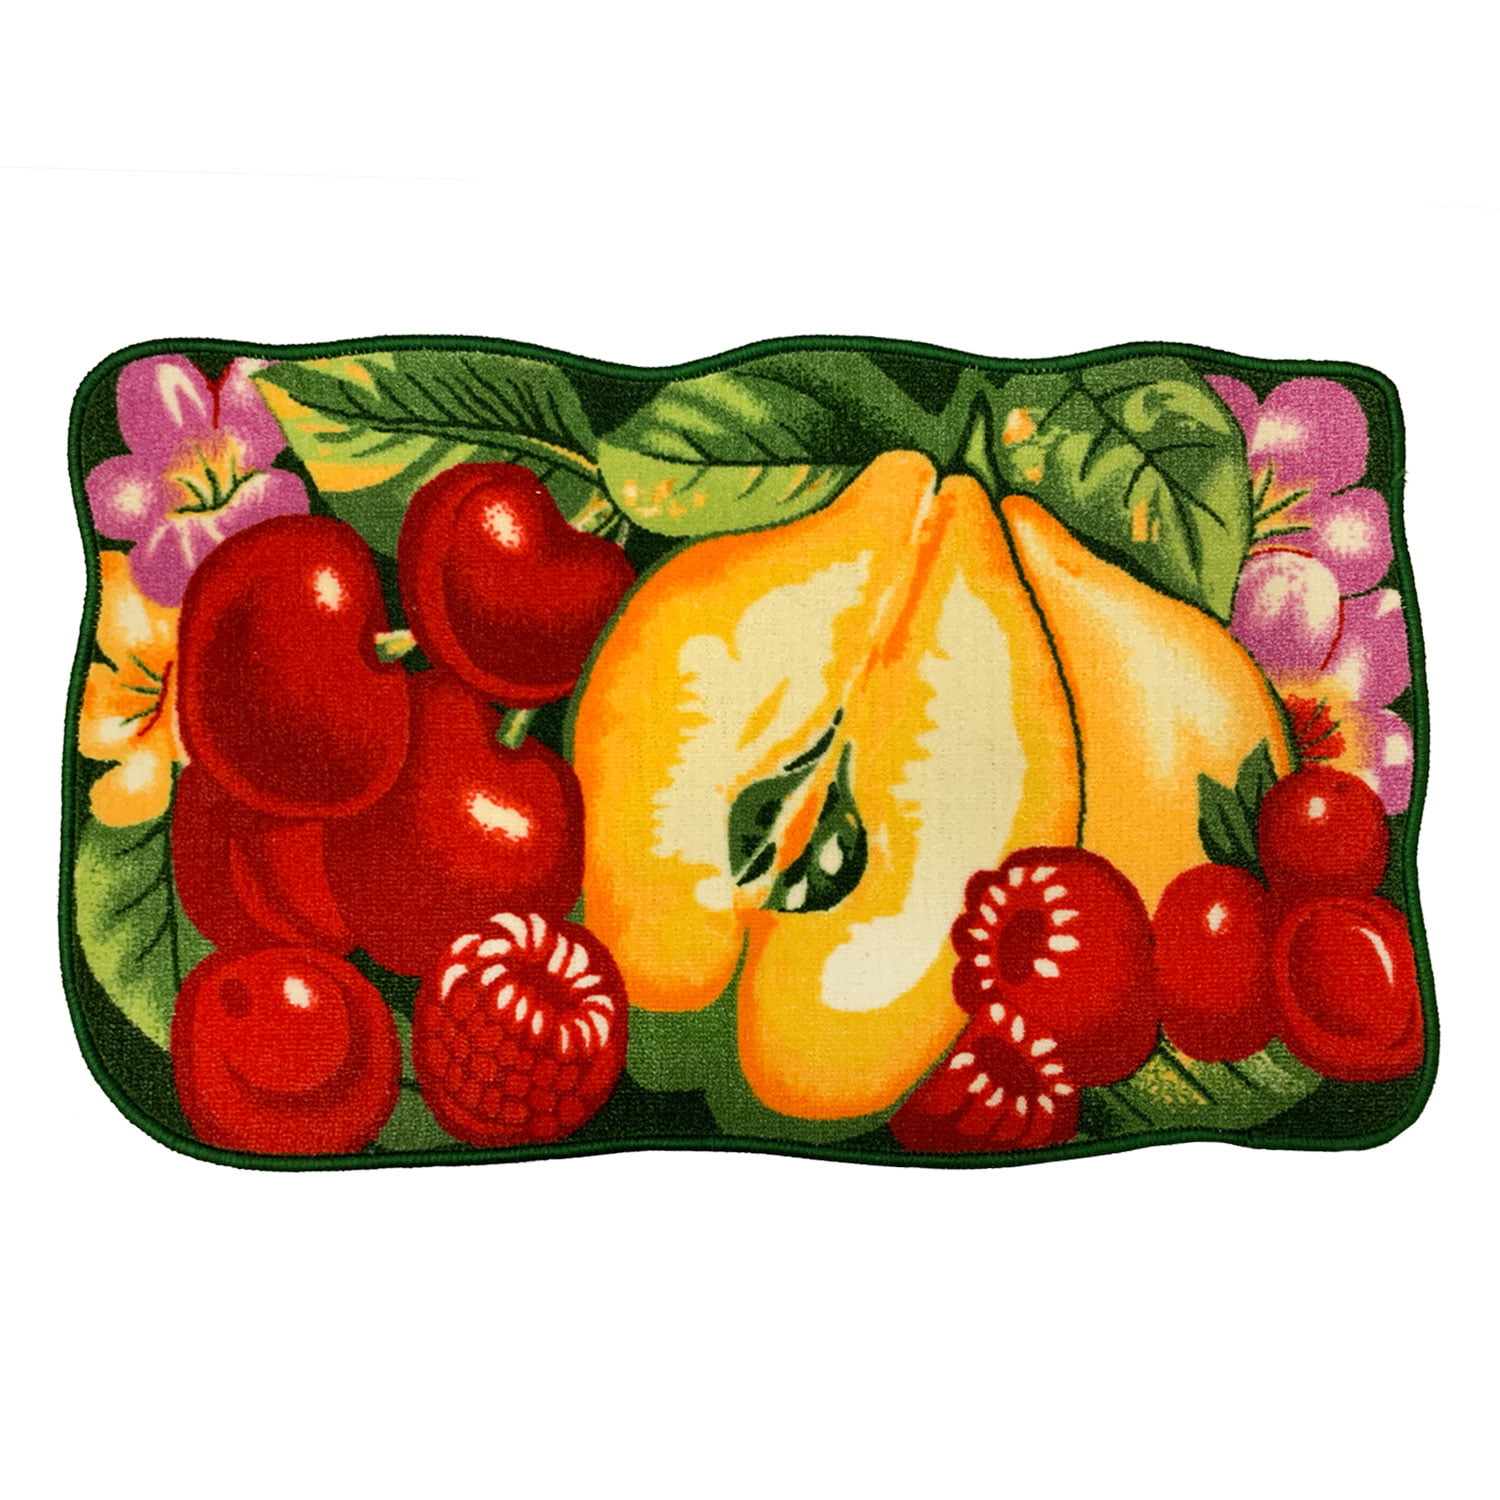 18" x 30" nonskid latex back 6 FRUITS by Daniel lighter PRINTED KITCHEN RUG 